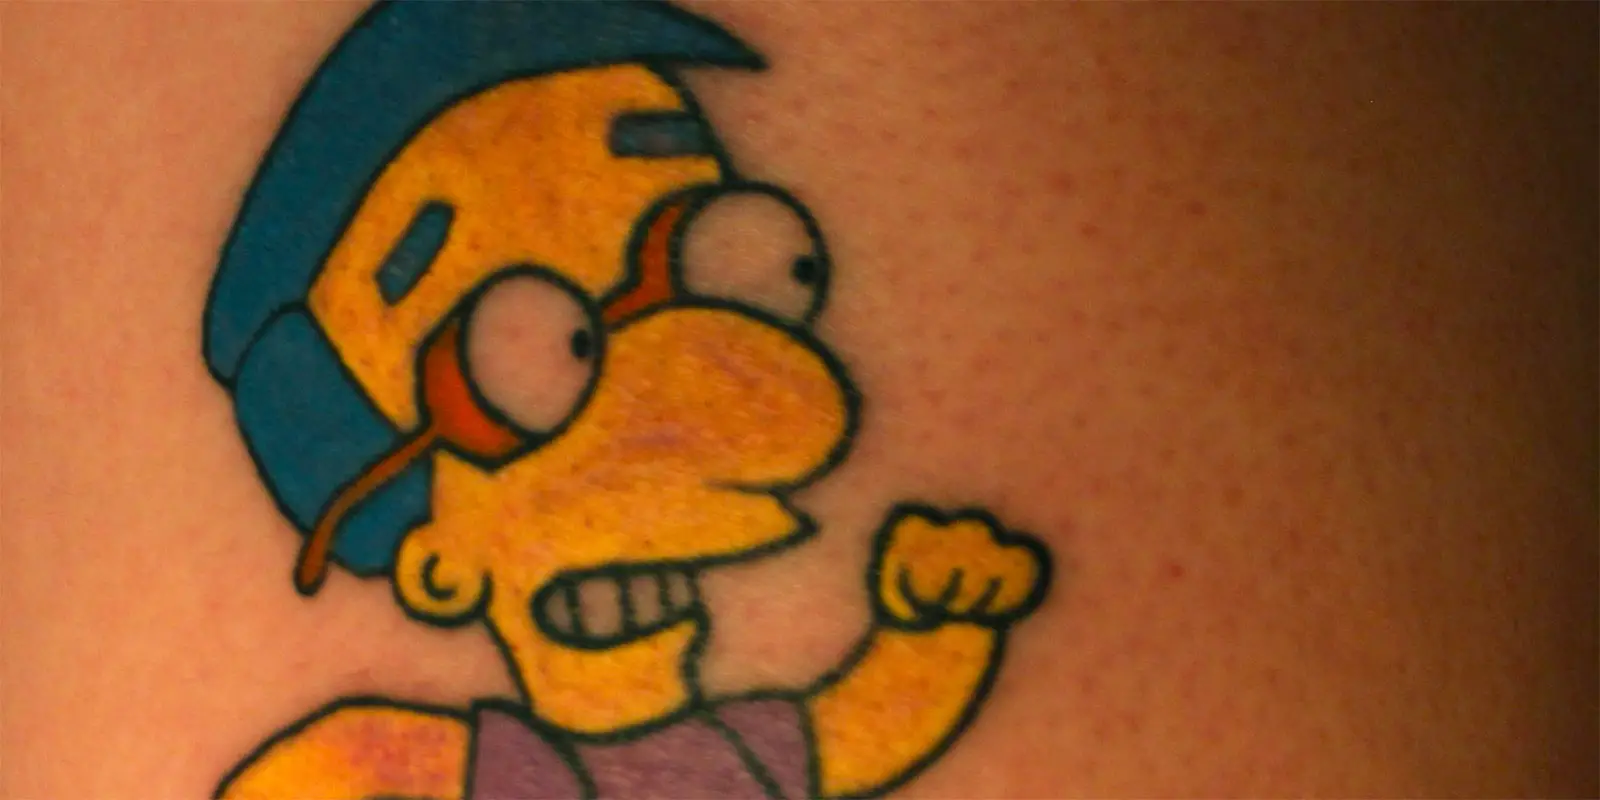 Treehouse of horror Bart     Tattoos by Pablodct  Facebook